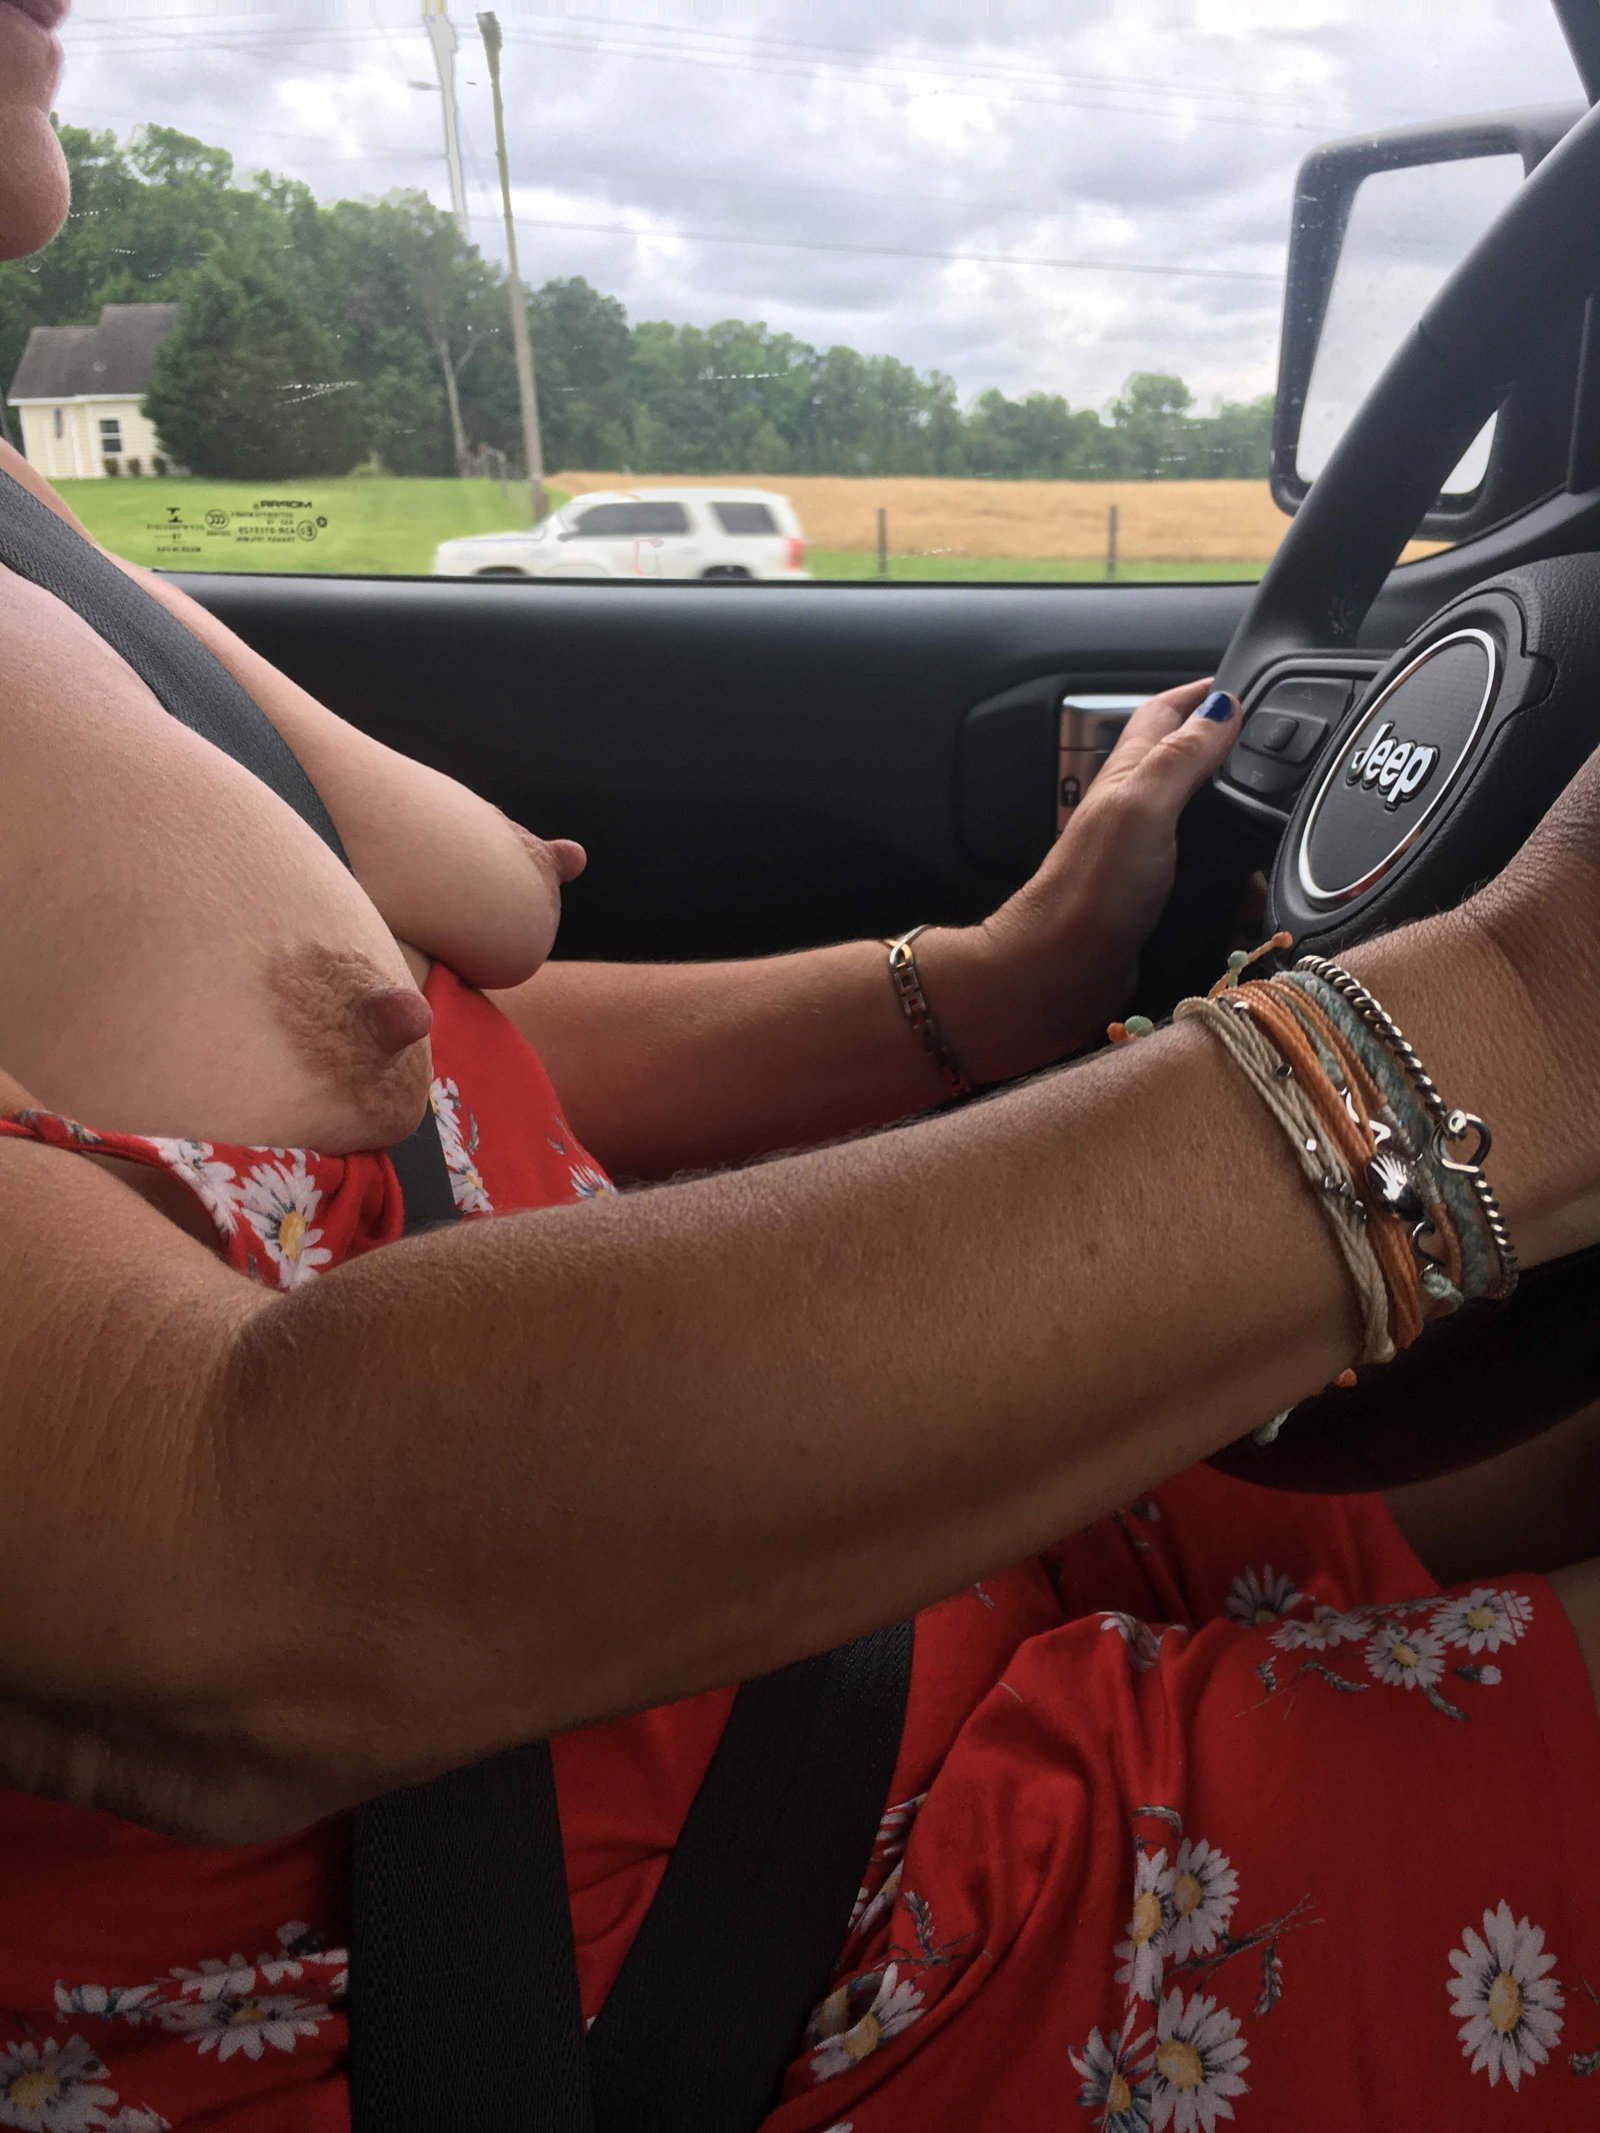 Photo by Valleyanallover with the username @Valleyanallover,  June 1, 2020 at 2:32 AM. The post is about the topic PublicWife and the text says 'Road trip!'